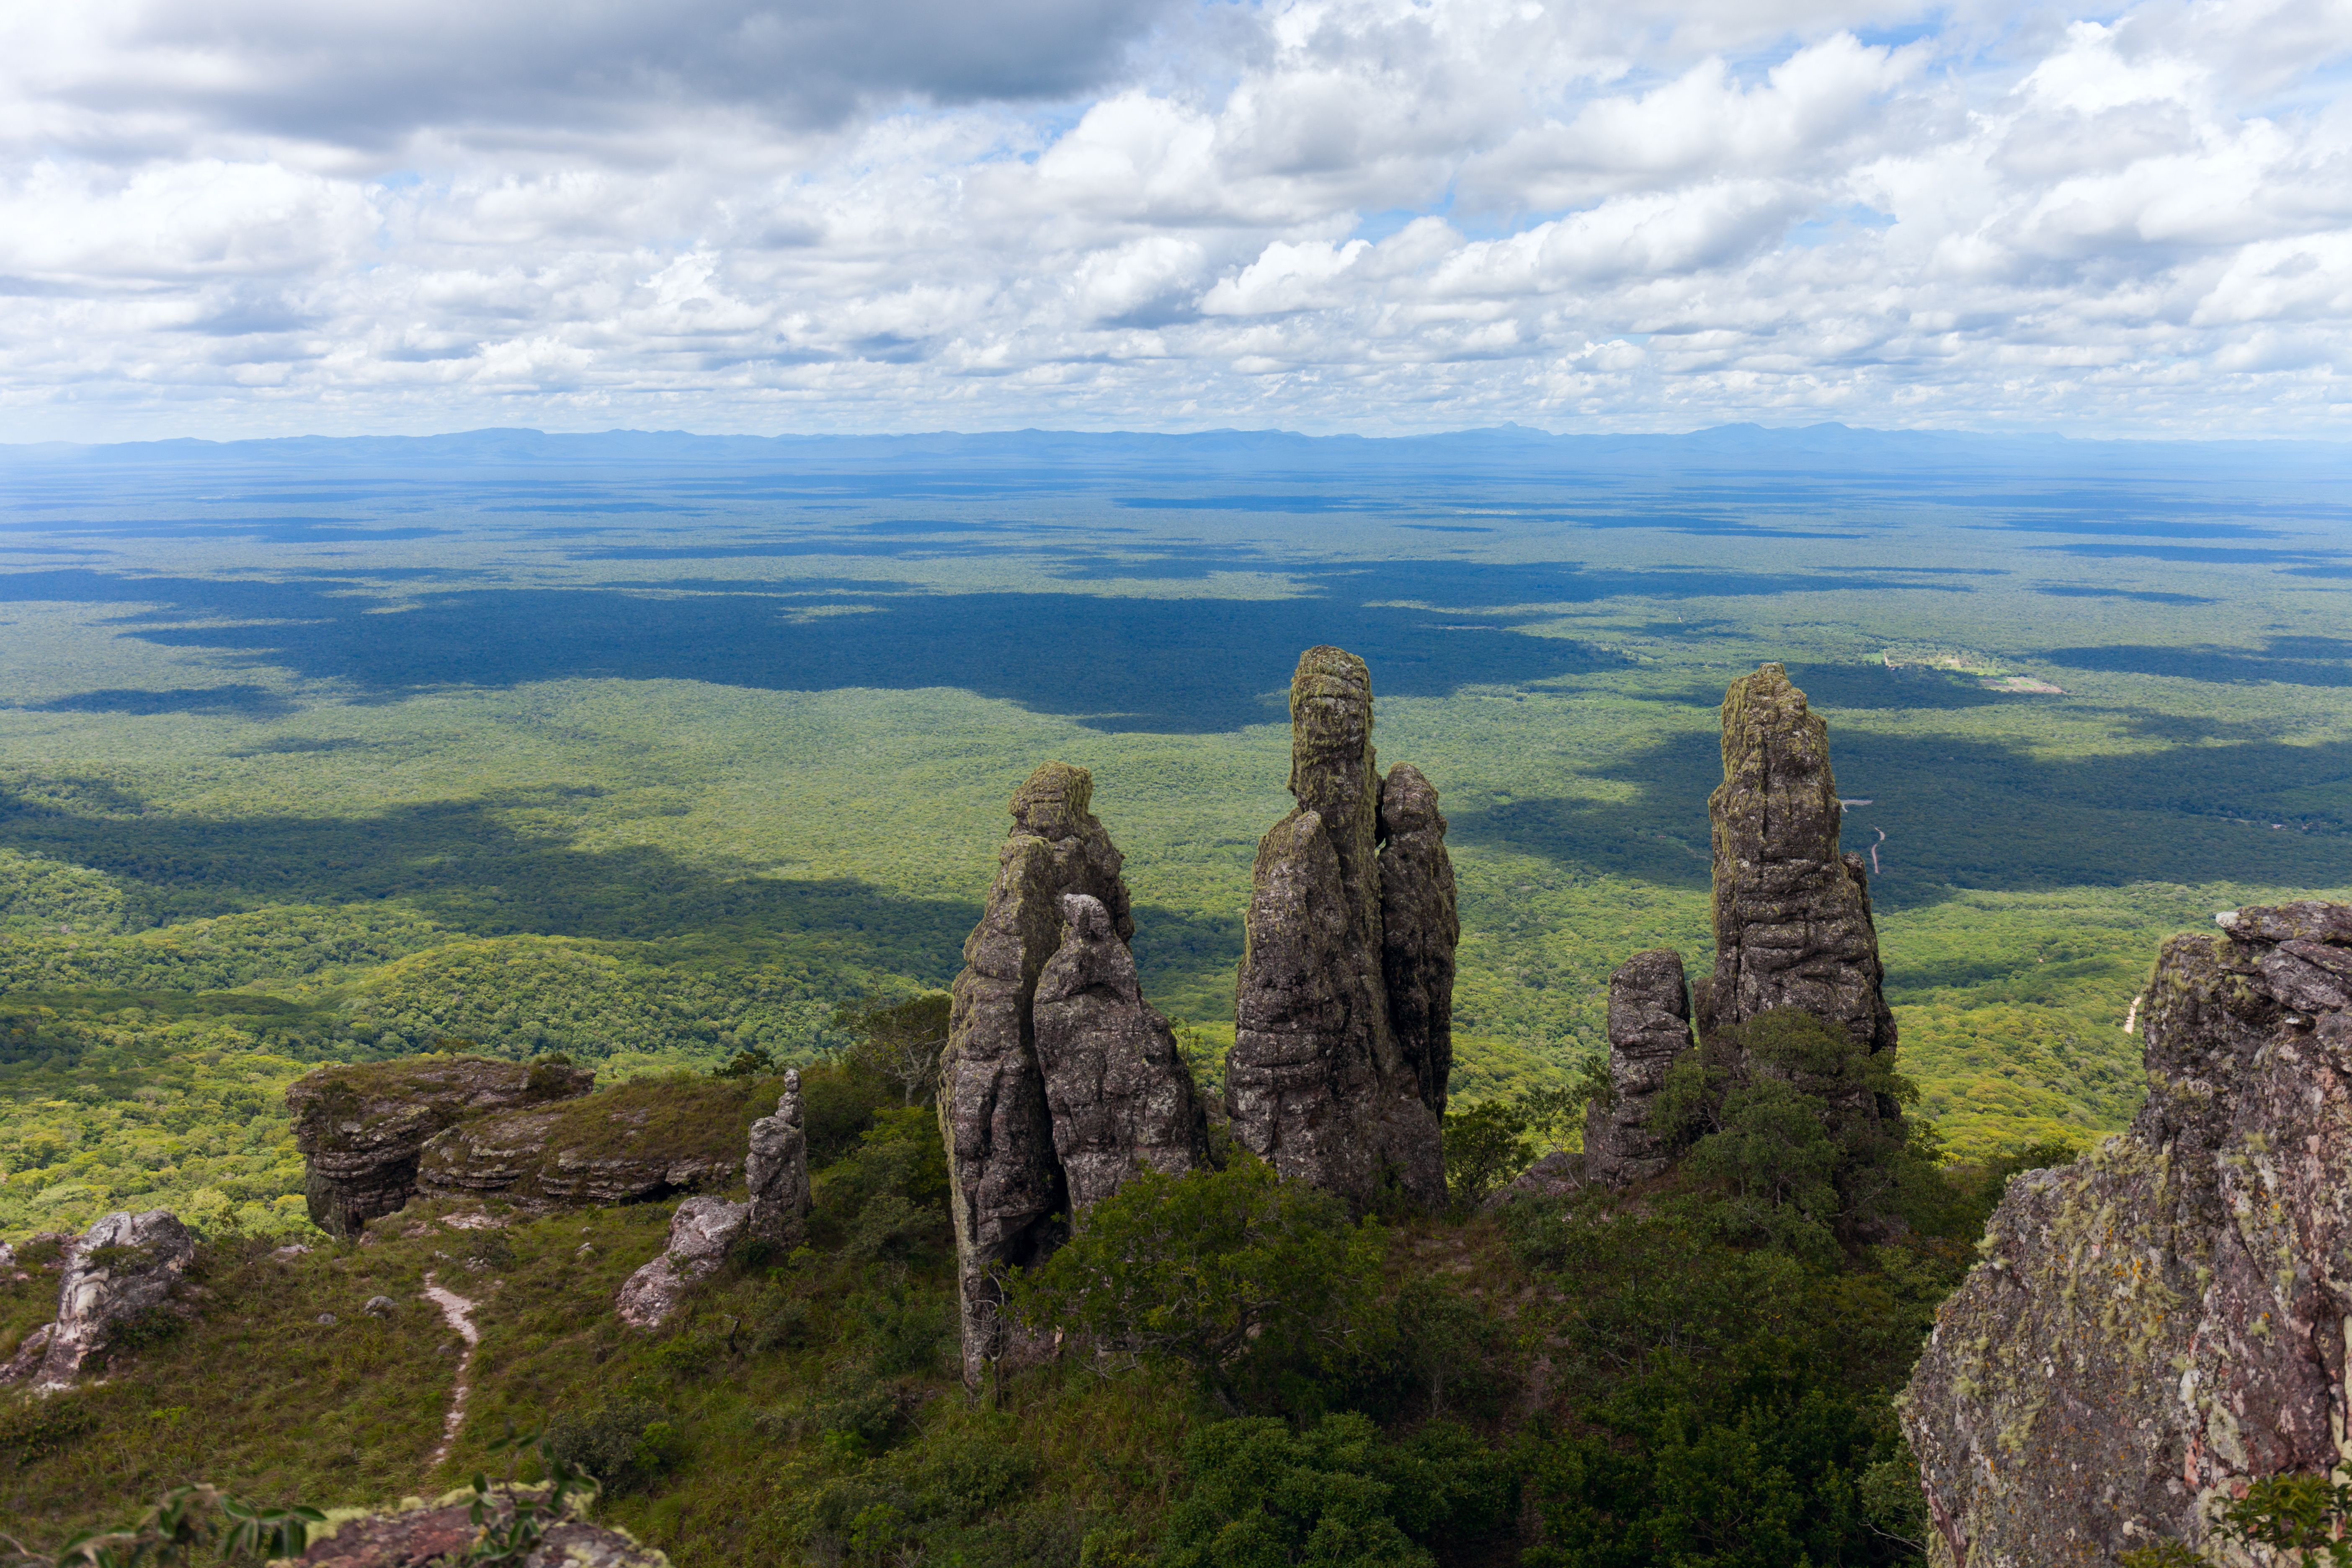 View of natural stone pillars in the Chiquitania region, Bolivia